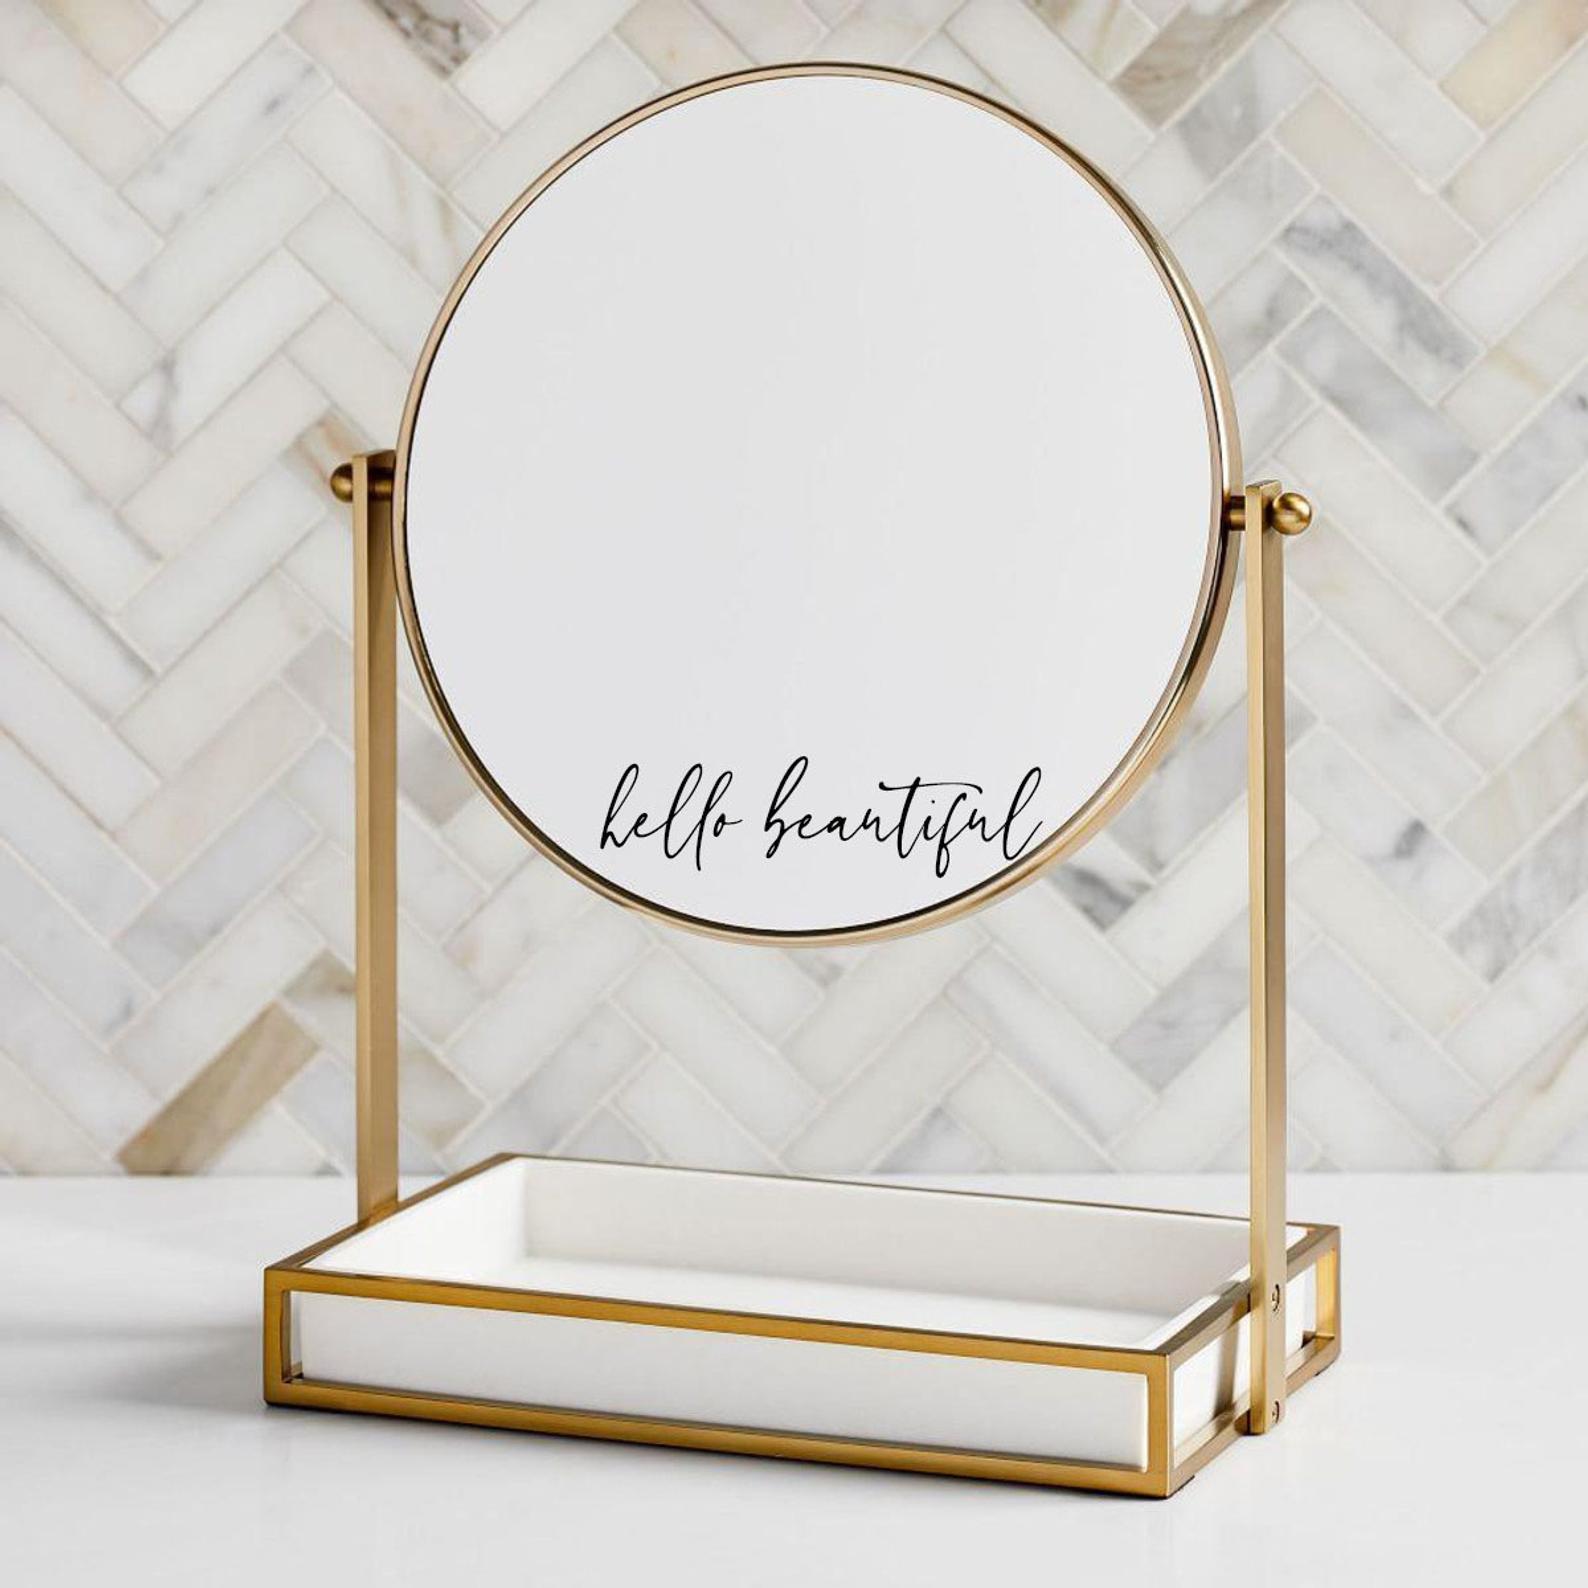 Positive Affirmation Mirror Sticker You're So Golden Mirror Decal Self Love Sticker Gift For BFF Vinyl Decal Bridesmaid Gift